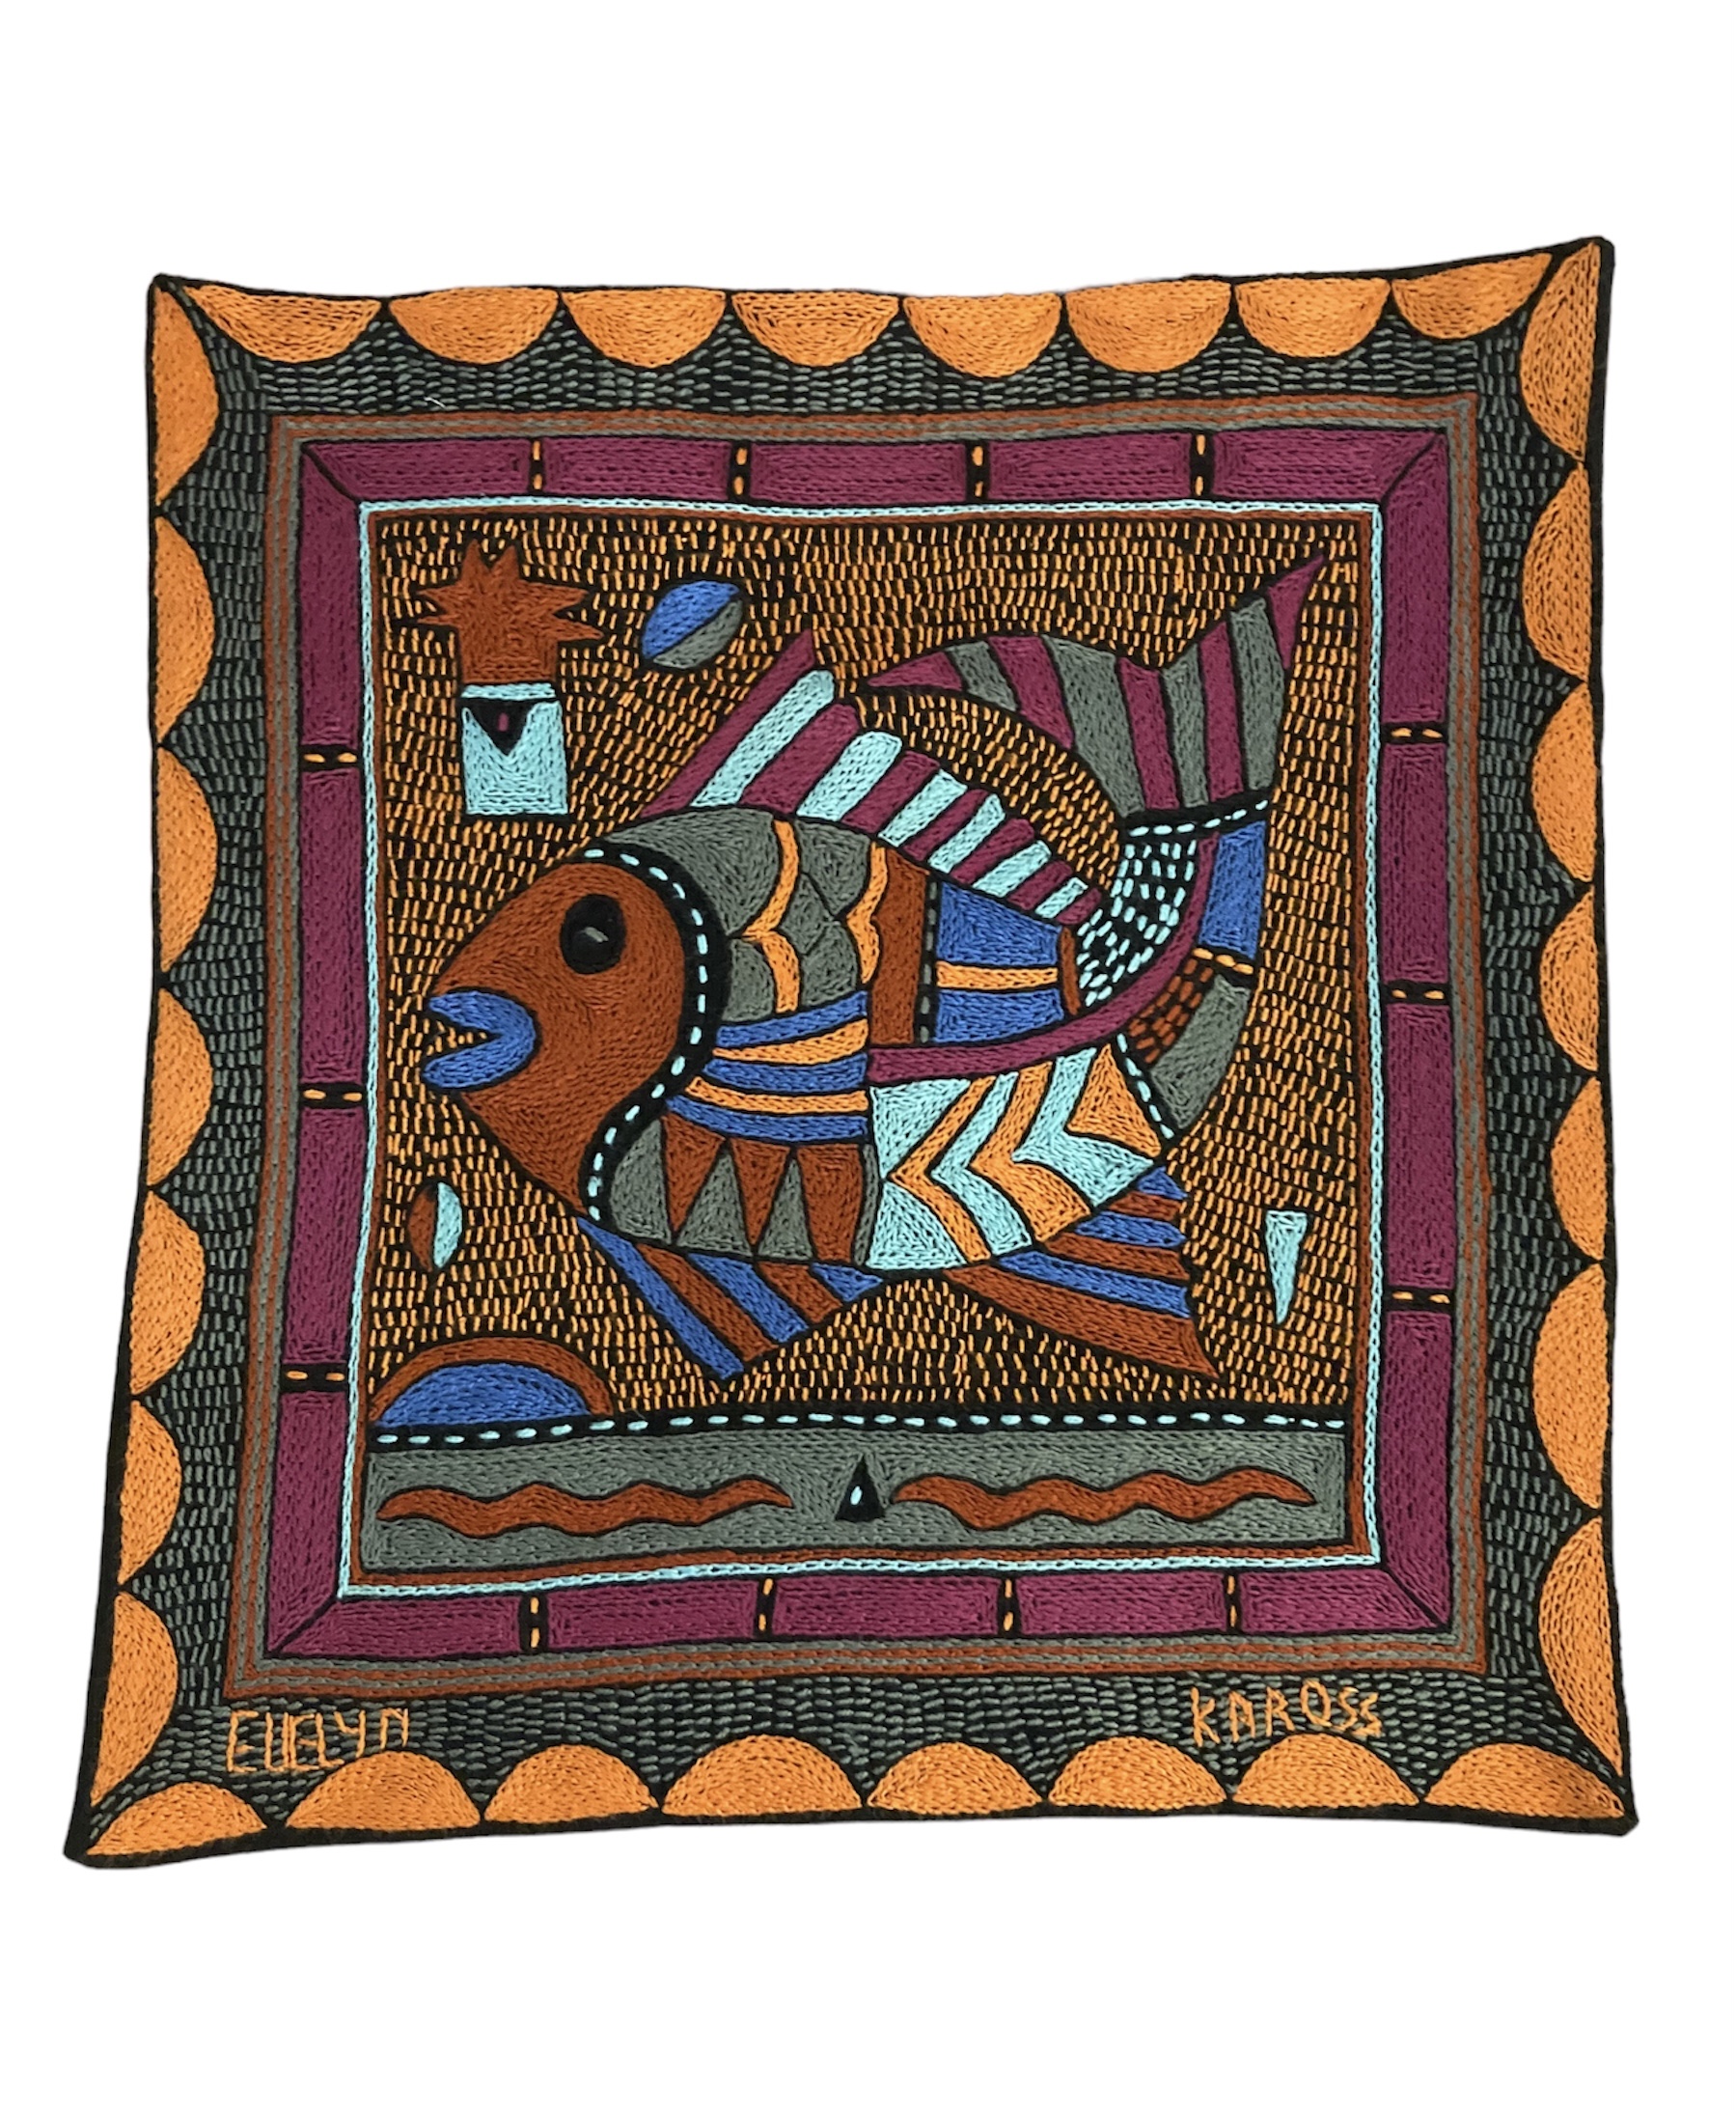 100% Hand-Embroidered Shangaan Cushion Cover  #201902